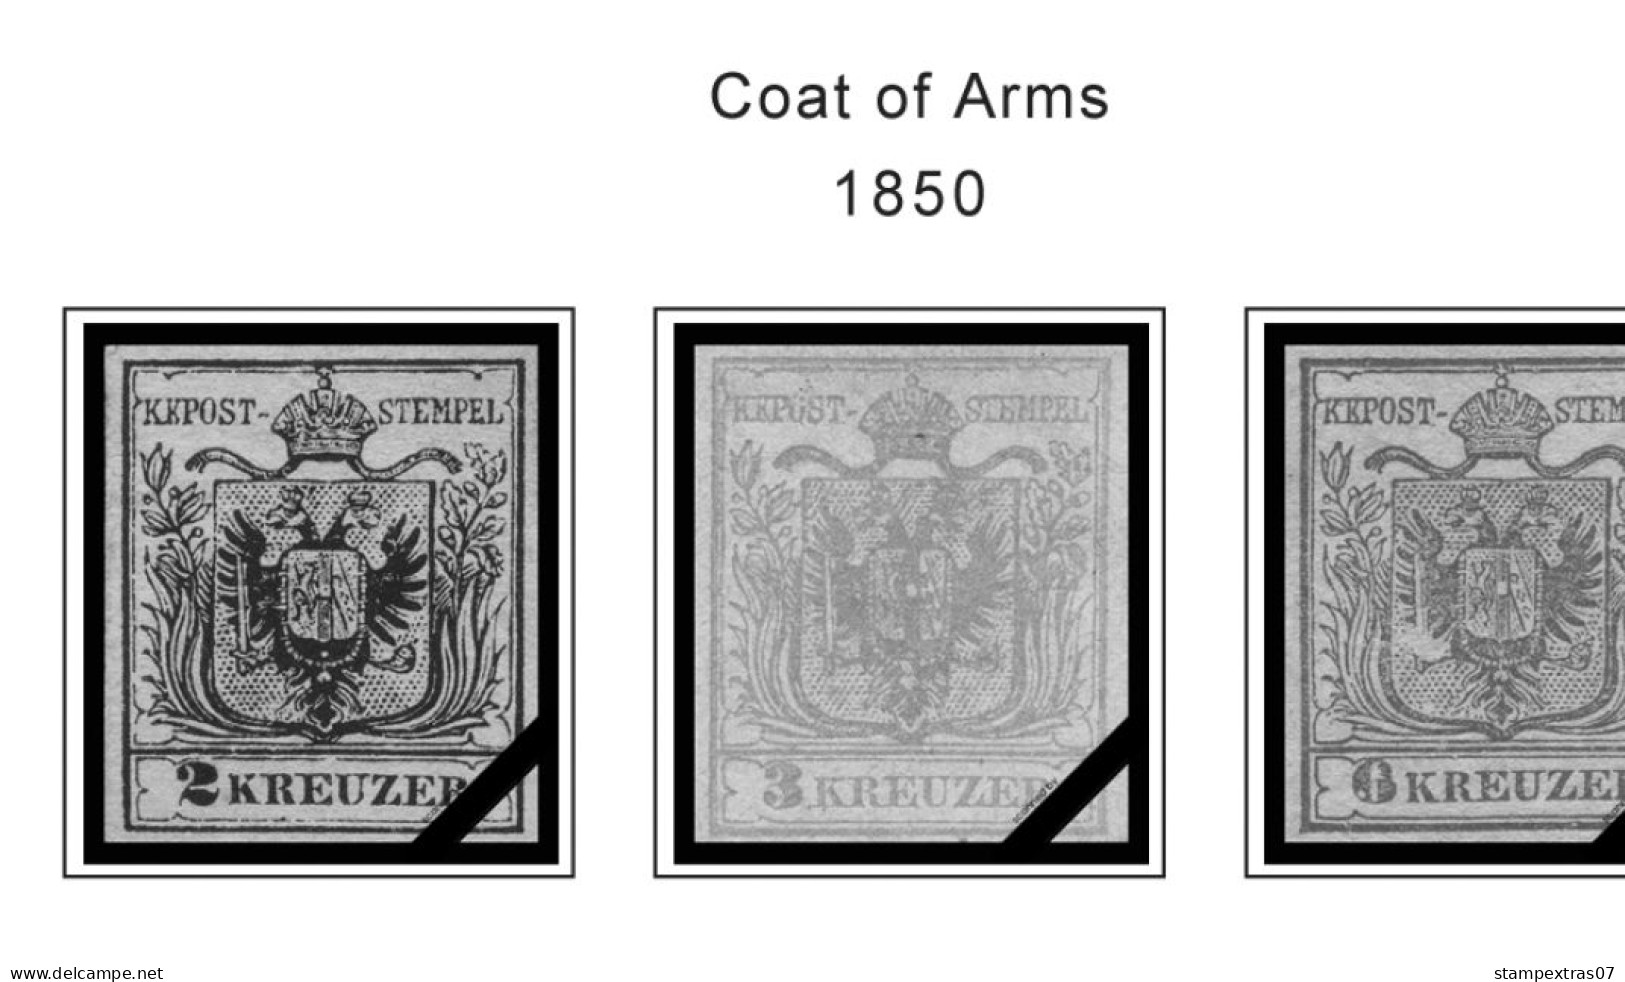 AUSTRIA 1850-2010 + 2011-2020 STAMP ALBUM PAGES (417 B&w Illustrated Pages) - Anglais